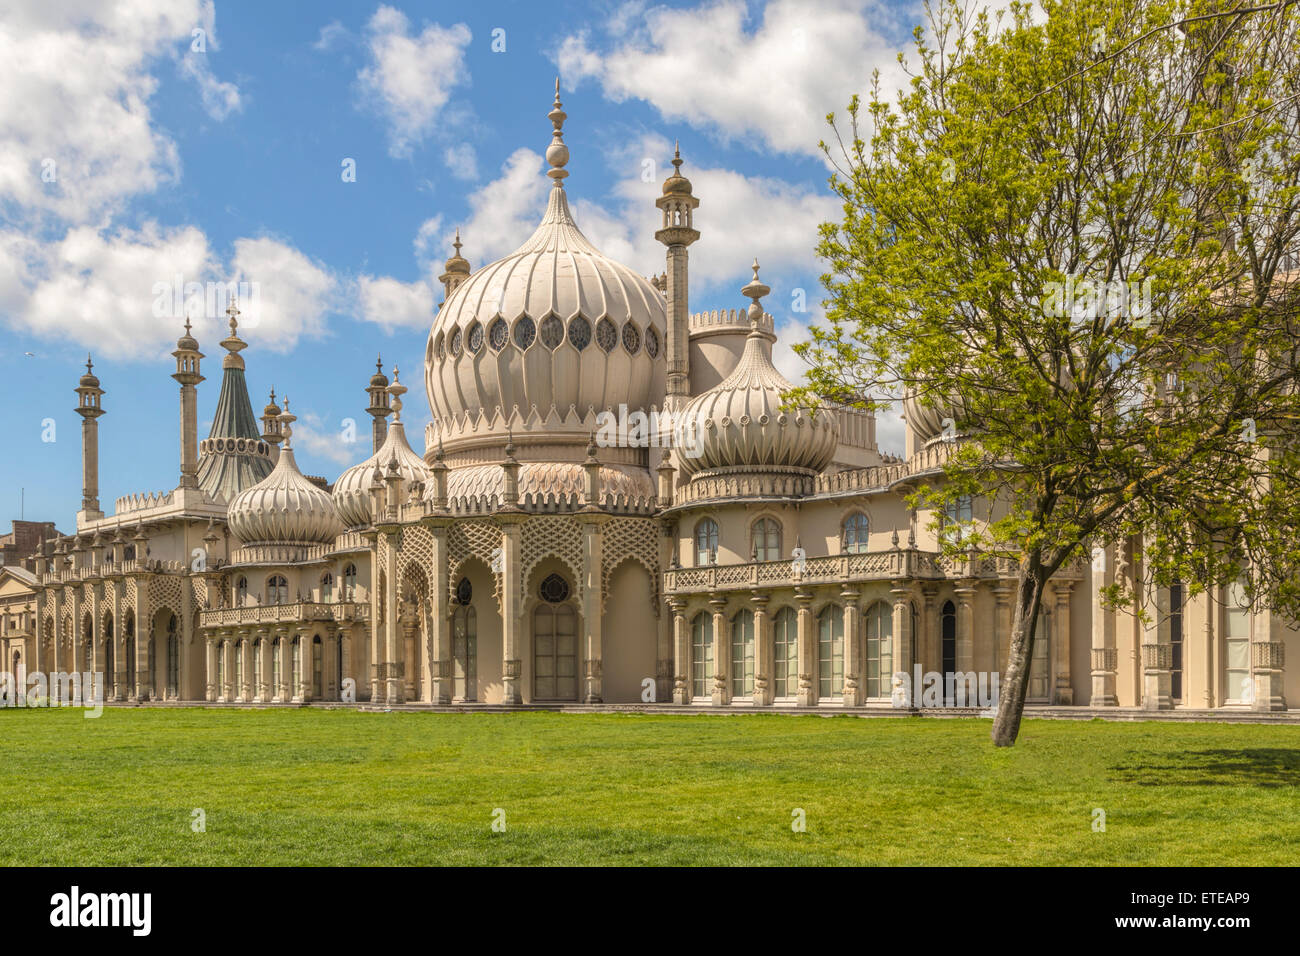 Facade of the Royal Pavilion, a former royal residence in Brighton, East Sussex, England, UK. It's a UNESCO World Heritage Site. Stock Photo